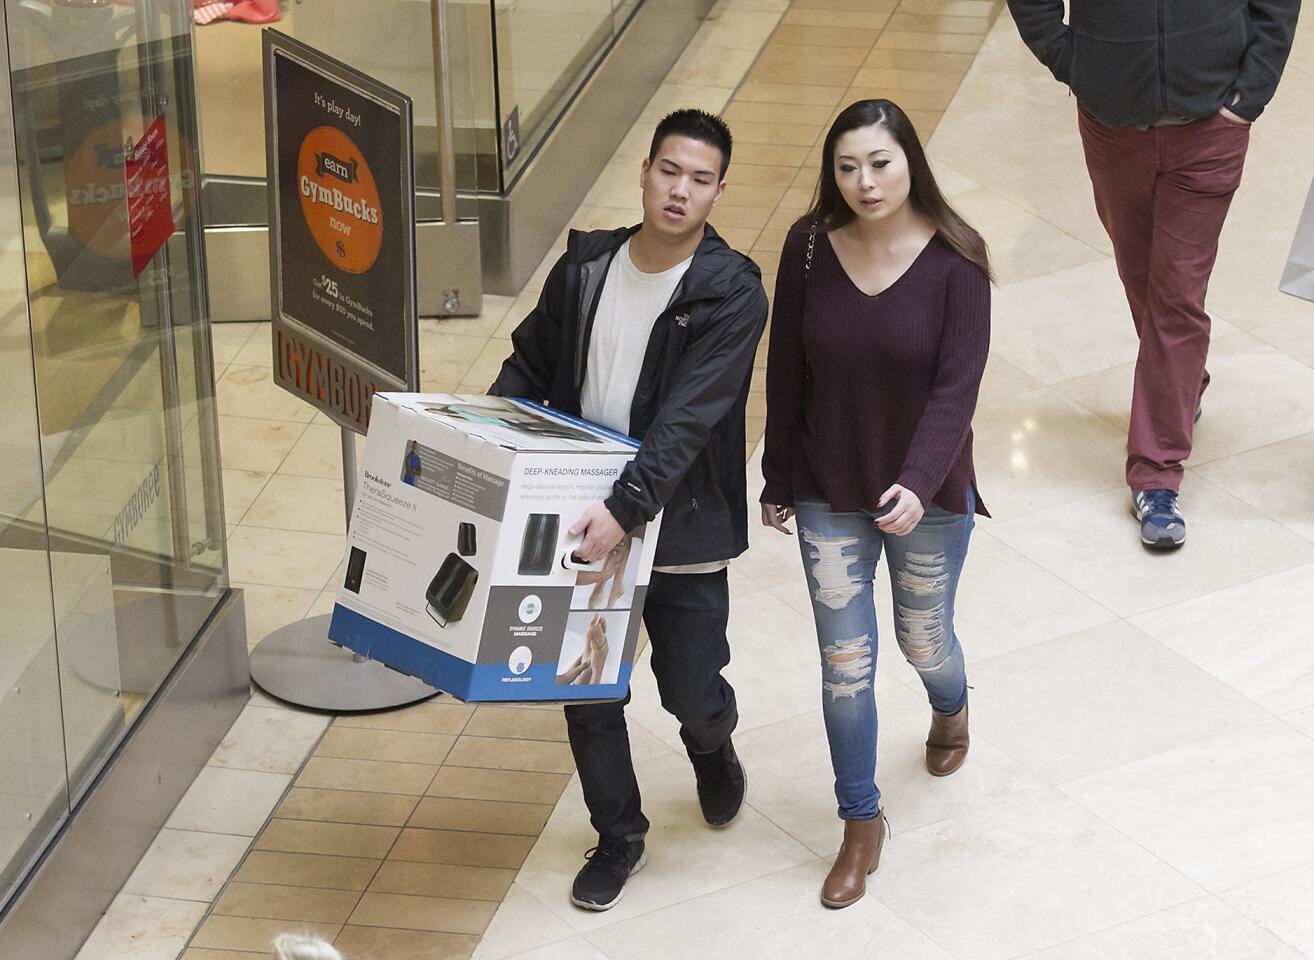 A shopper carries a foot massager bought as a gift at Costa Mesa’s South Coast Plaza on Friday, two days before Christmas.